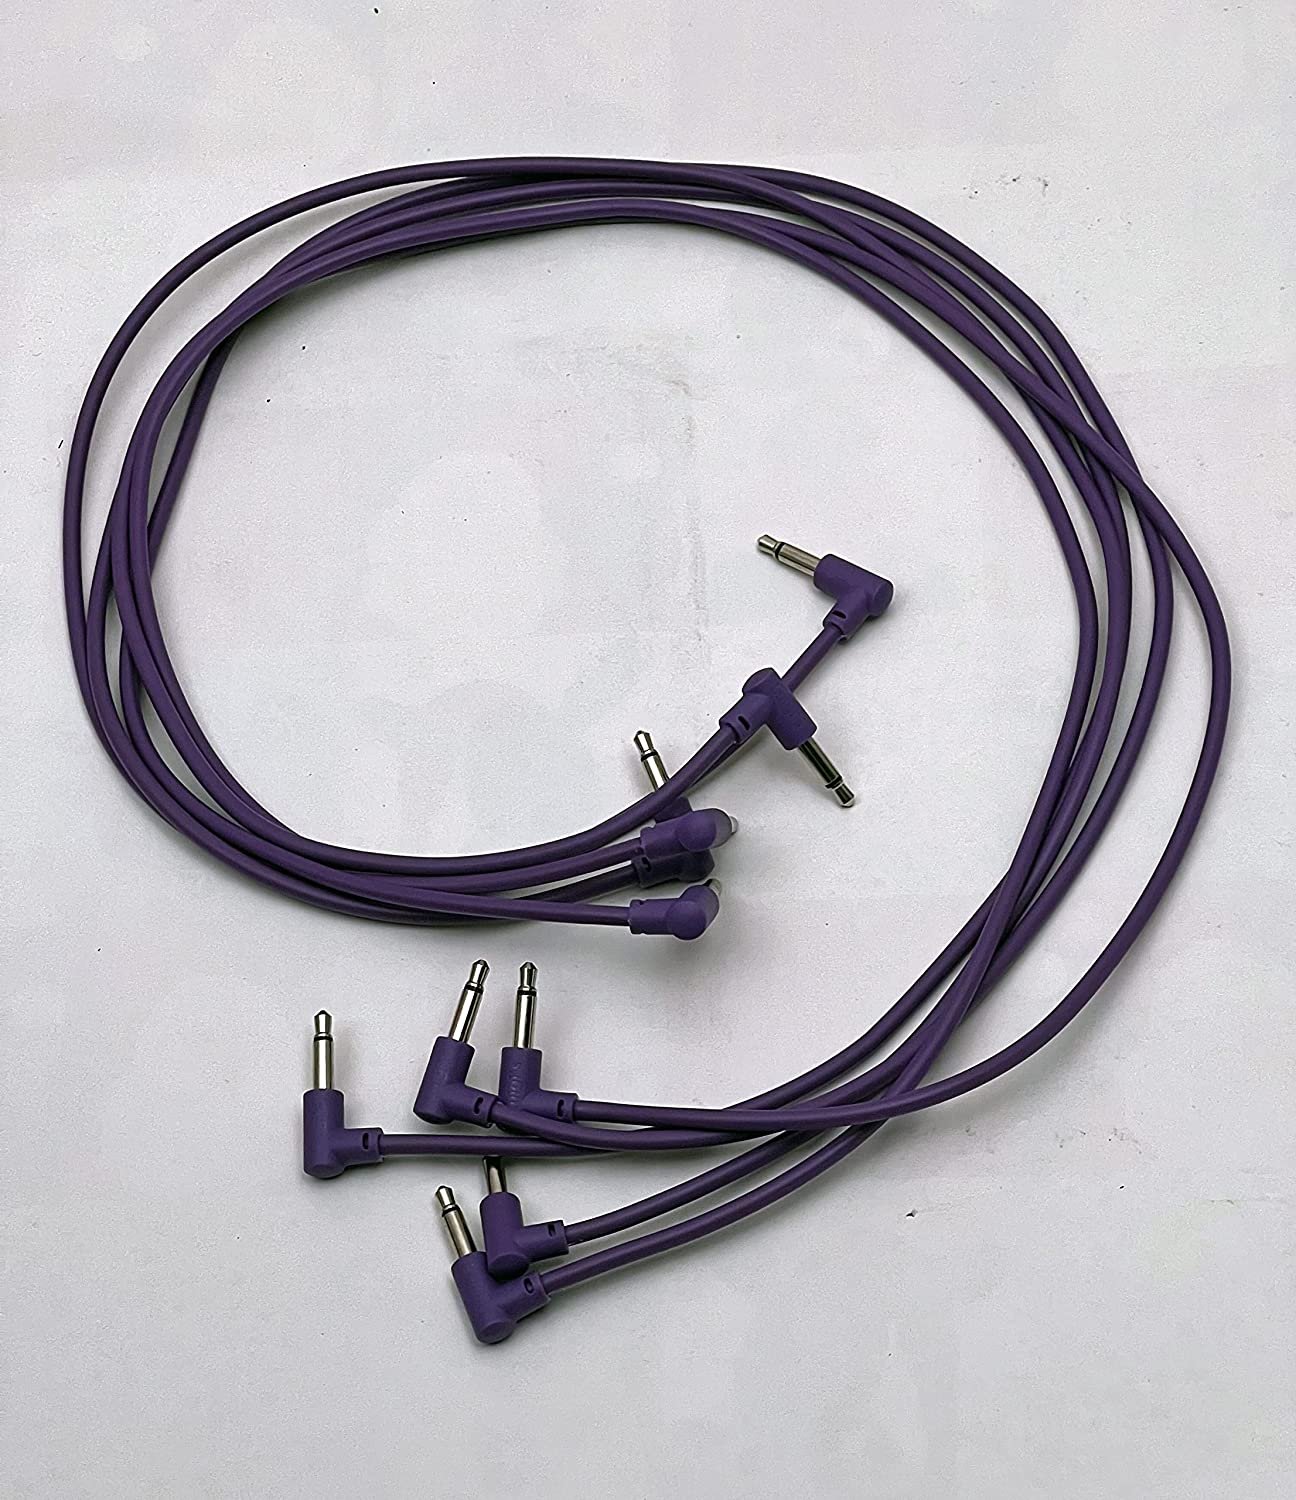 Luigis Modular M-PAR Right Angled Eurorack Patch Cables - Package of 5 Purple Cables, 24 (60 cm)